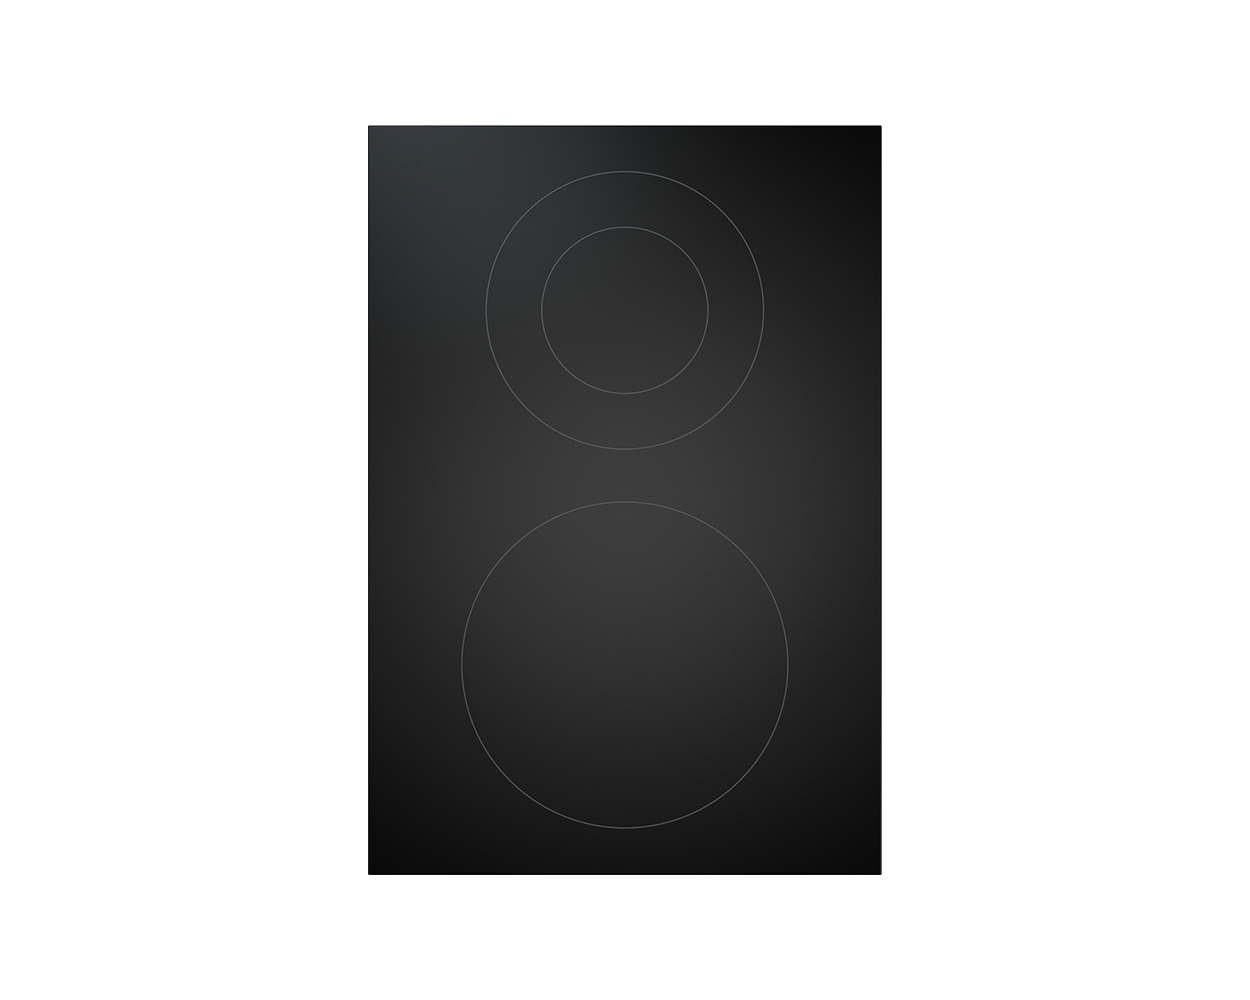 Bora Professional 3.0 modular induction HiLight cooktop extractor. Sold by Krieder UK